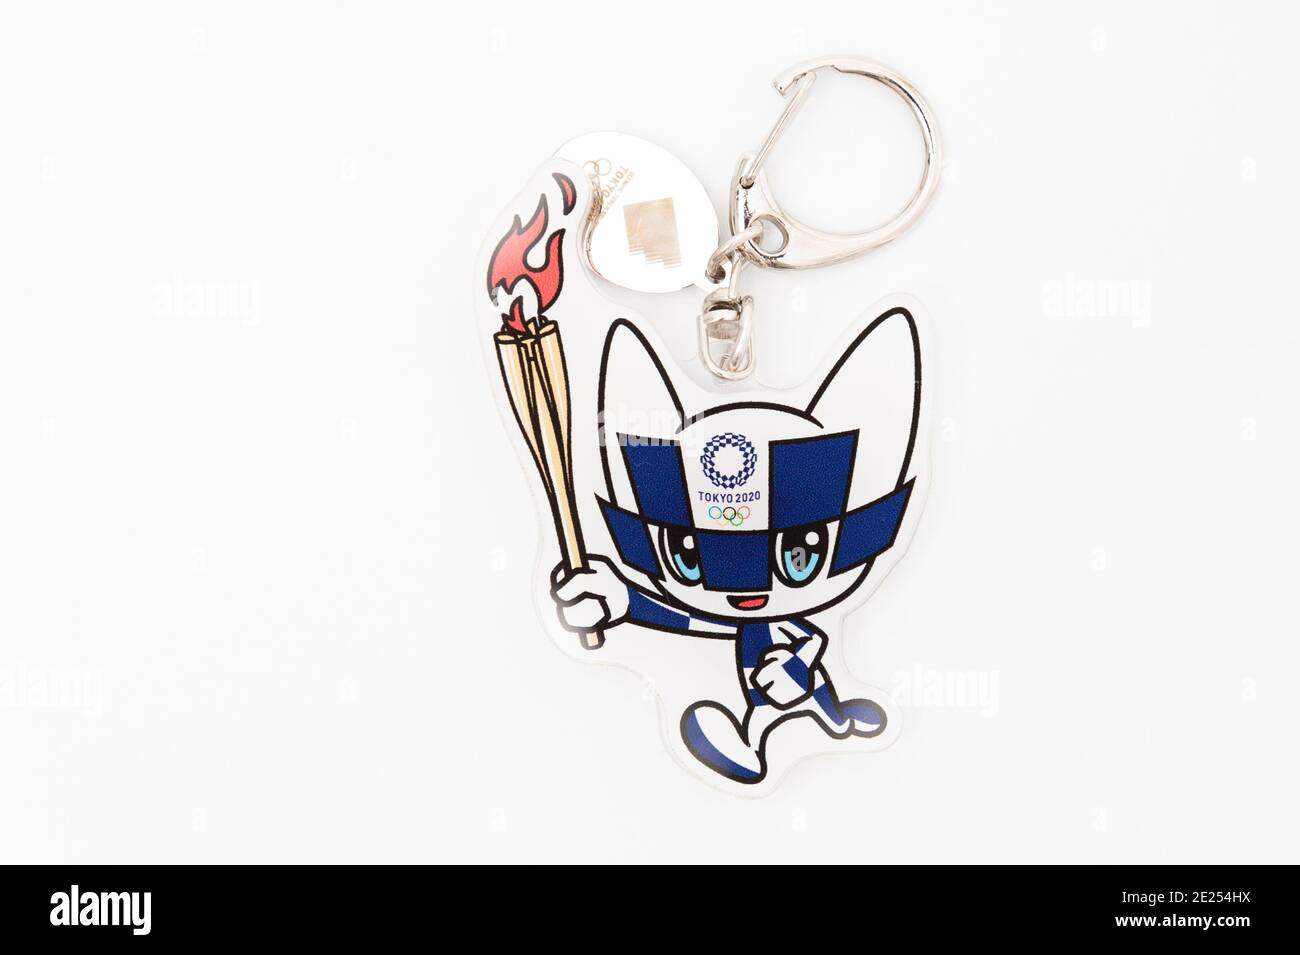 Tokyo, Japan - January 4, 2021: 2020 Tokyo Olympic Mascot Miraitowa keychain official licensed. Copy space. Isolated on white background. Stock Photo